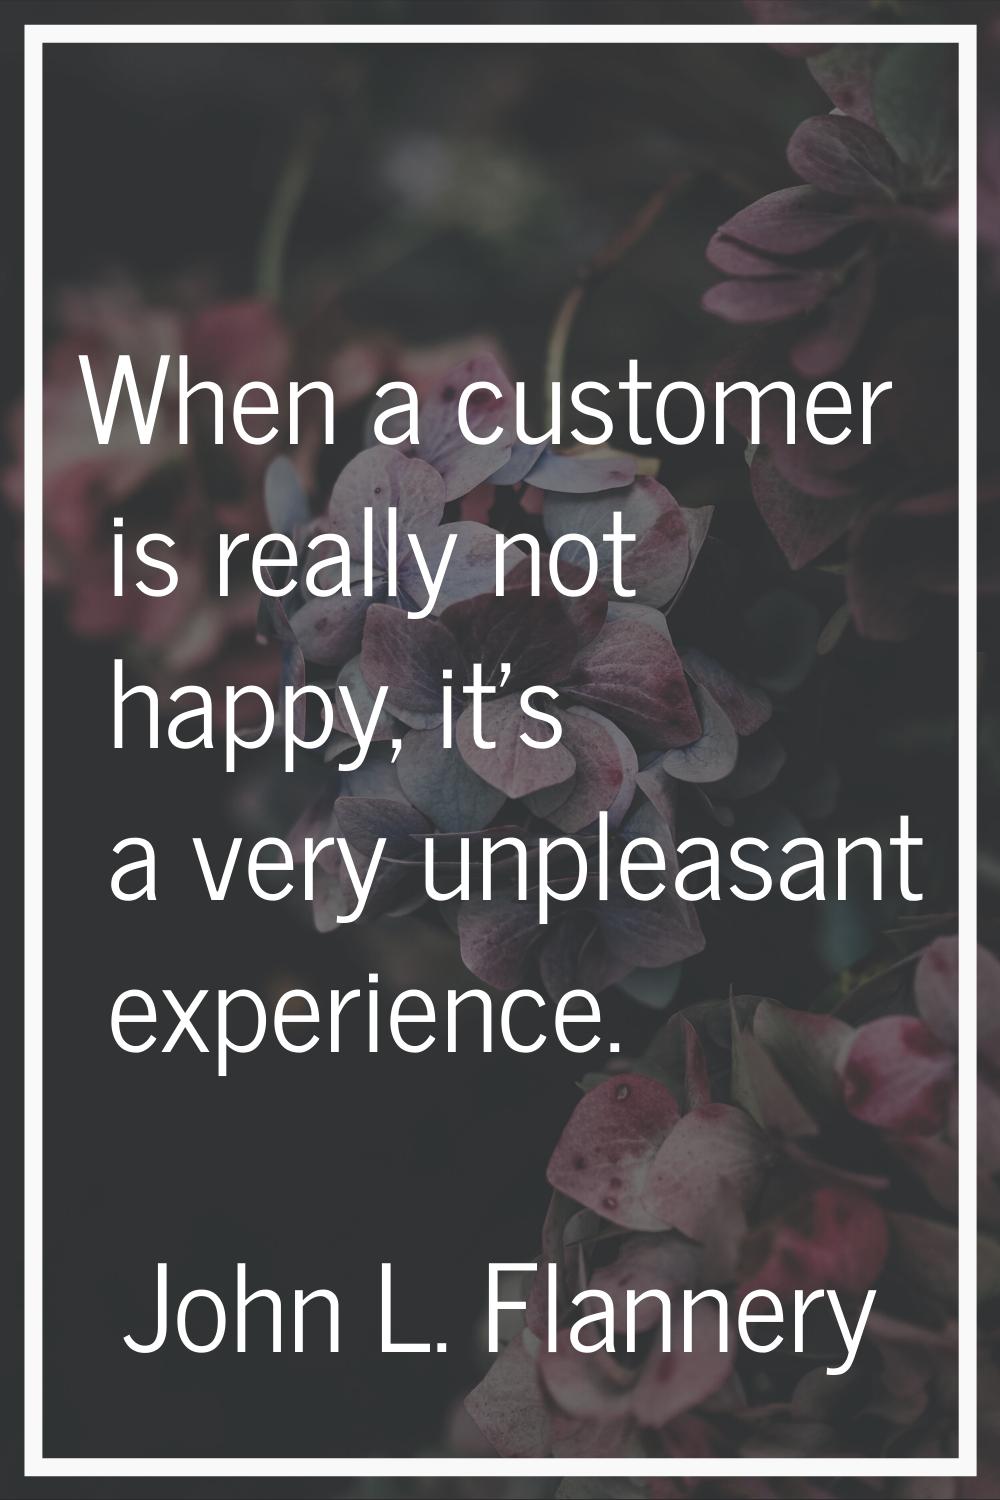 When a customer is really not happy, it's a very unpleasant experience.